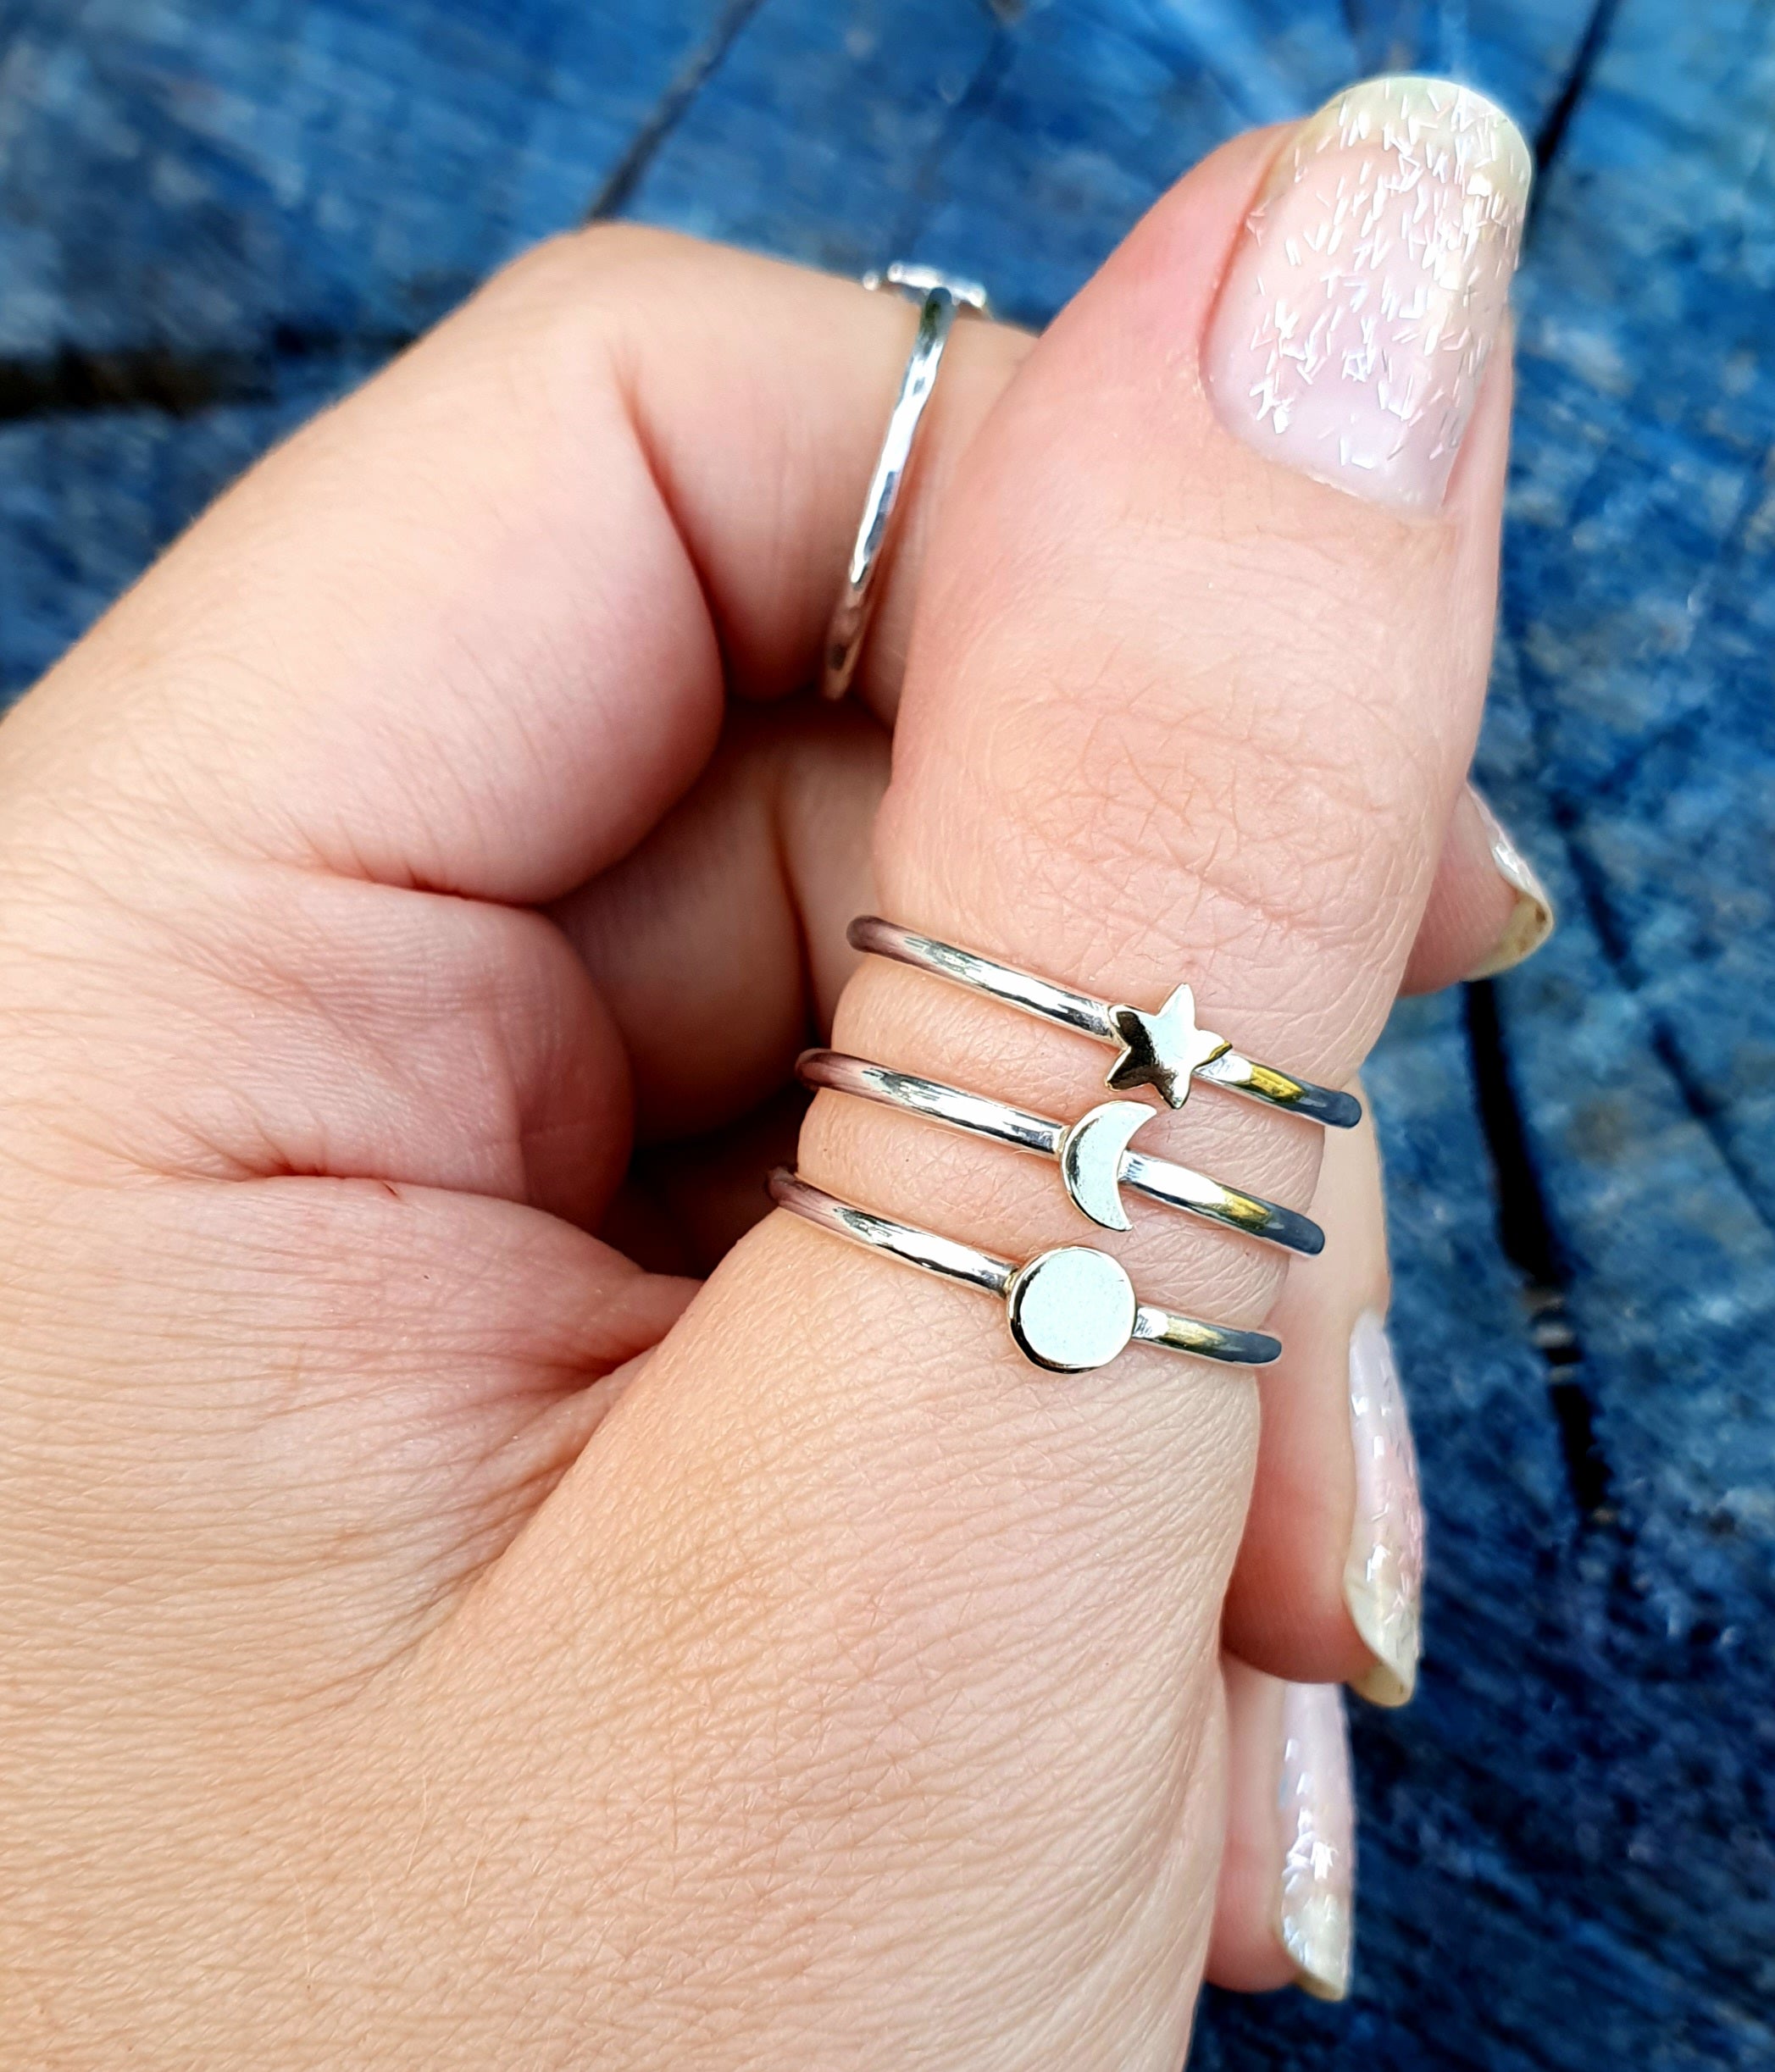 You are my Sun, Moon and Stars - sterling silver and 9k gold stacking rings